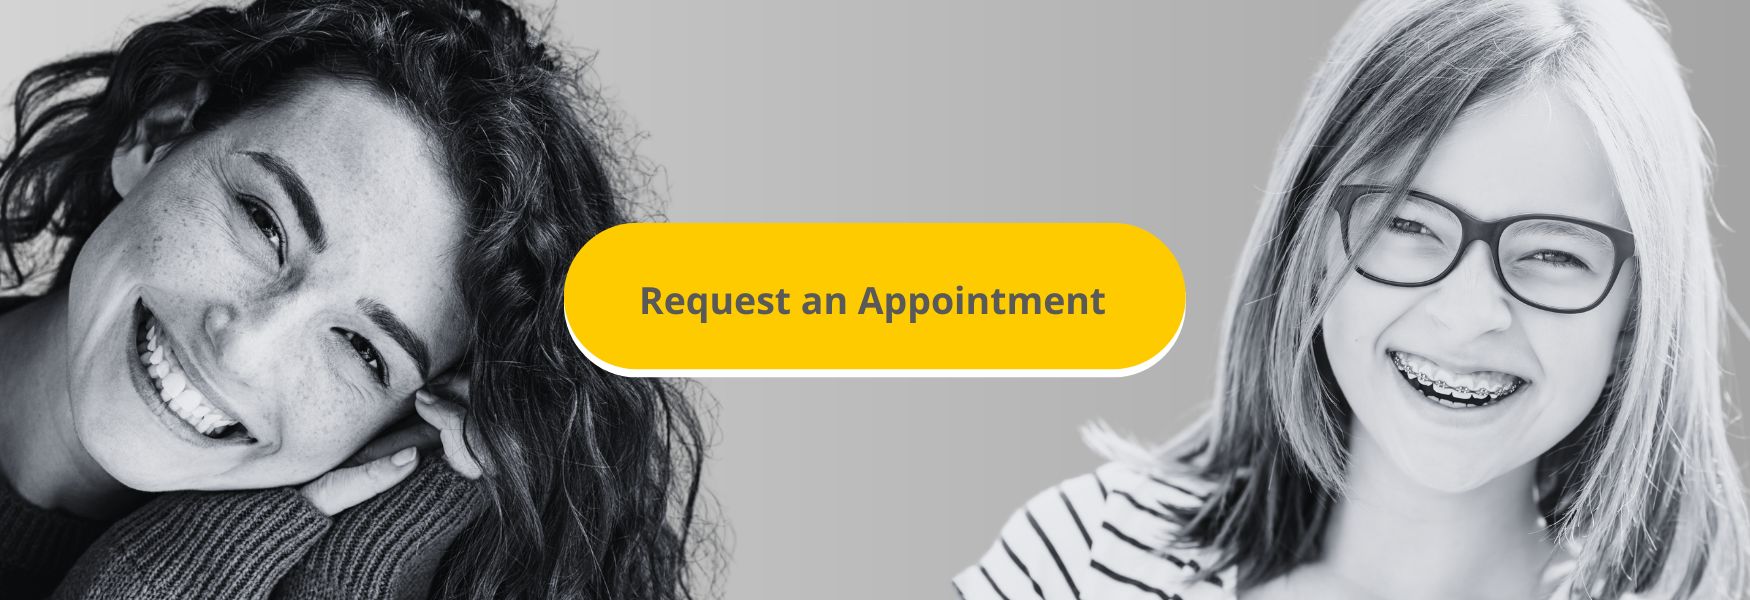 Request an orthodontist appointment at Dental Associates Fond du Lac.